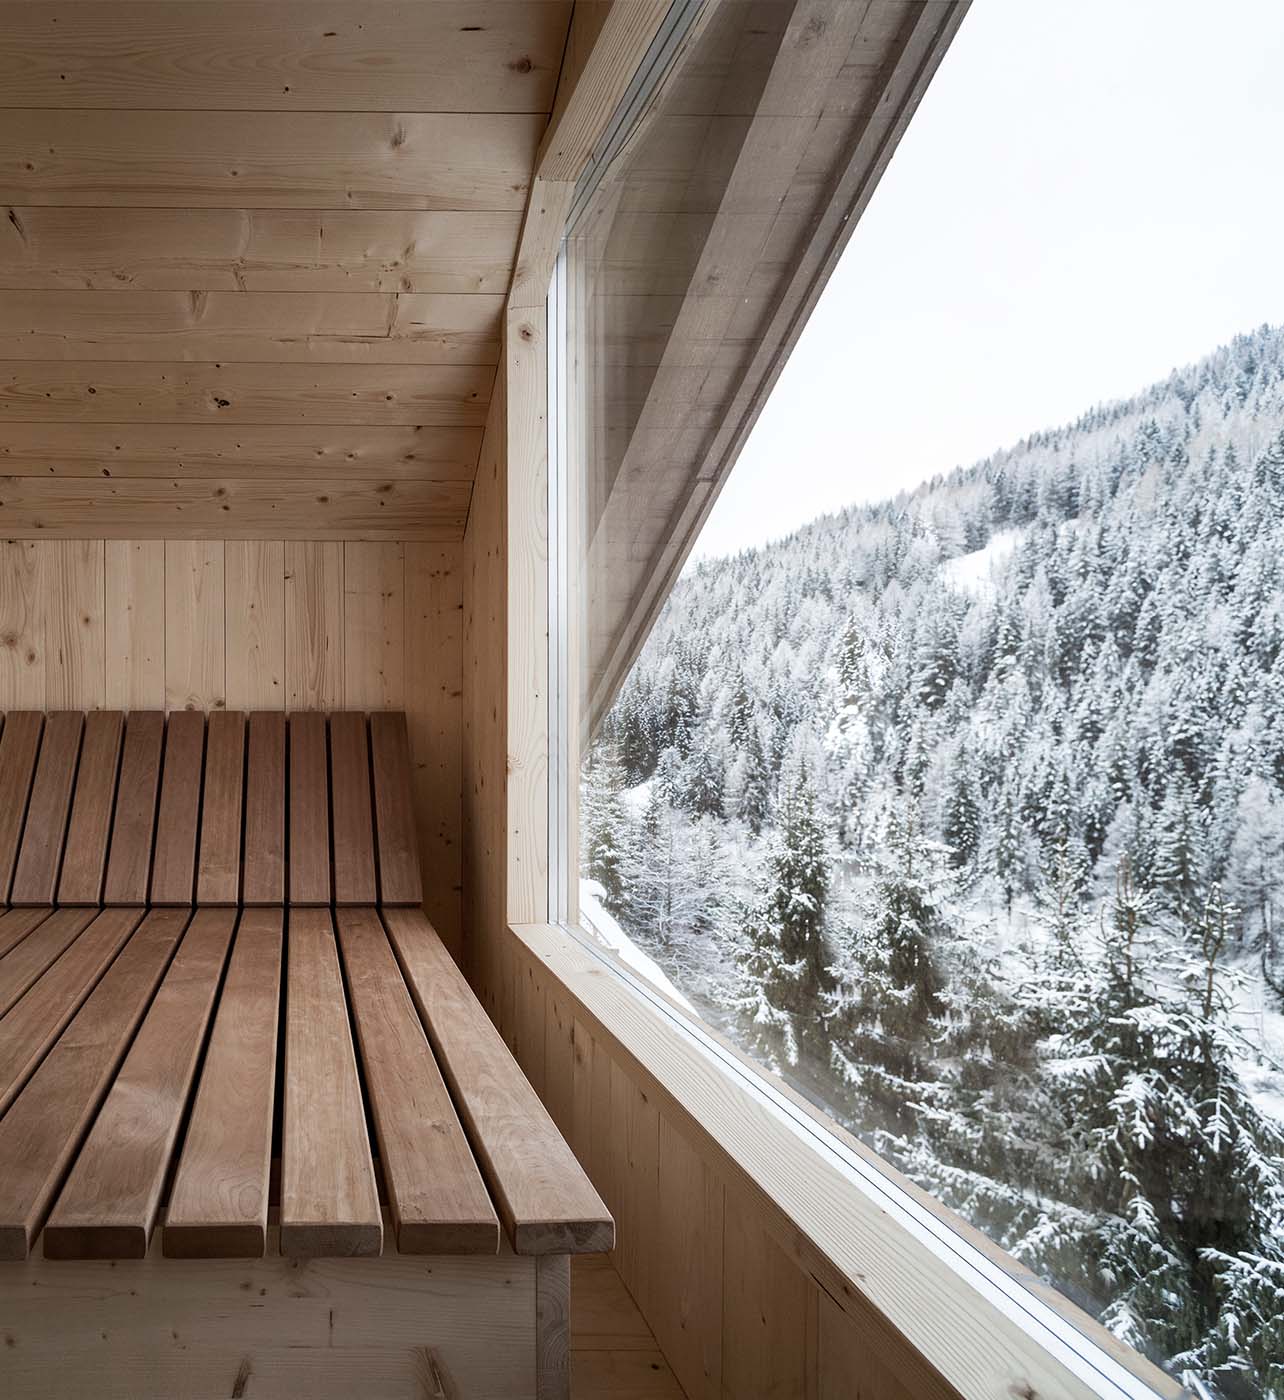 An indoor sauna overlooks a snowy treetop landscape in the Dolomites